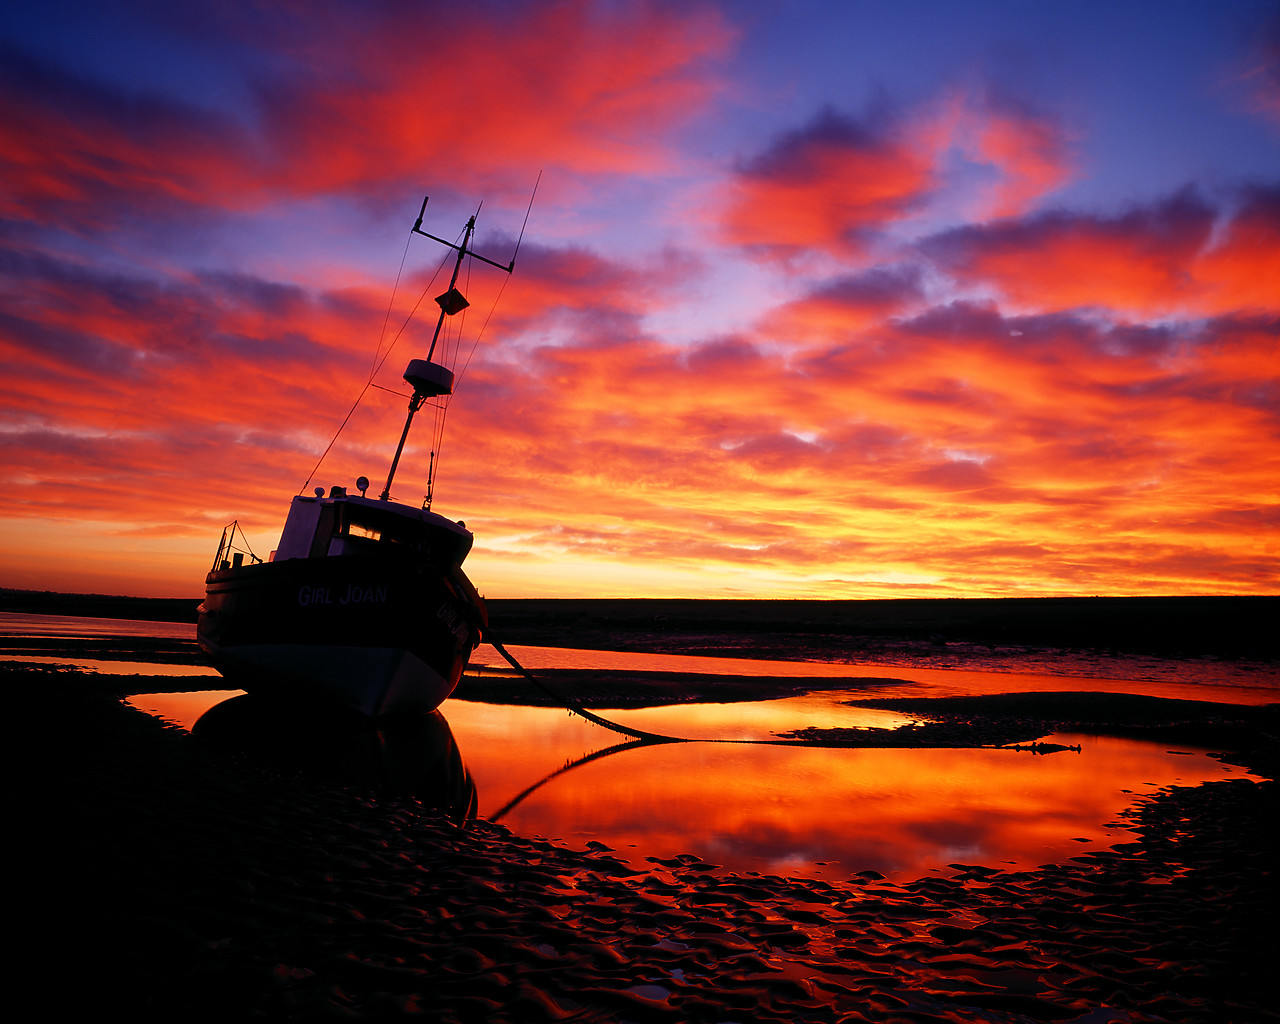 #881814-1 - Fishing Boat at Sunset, Wells-Next-The-Sea, Norfolk